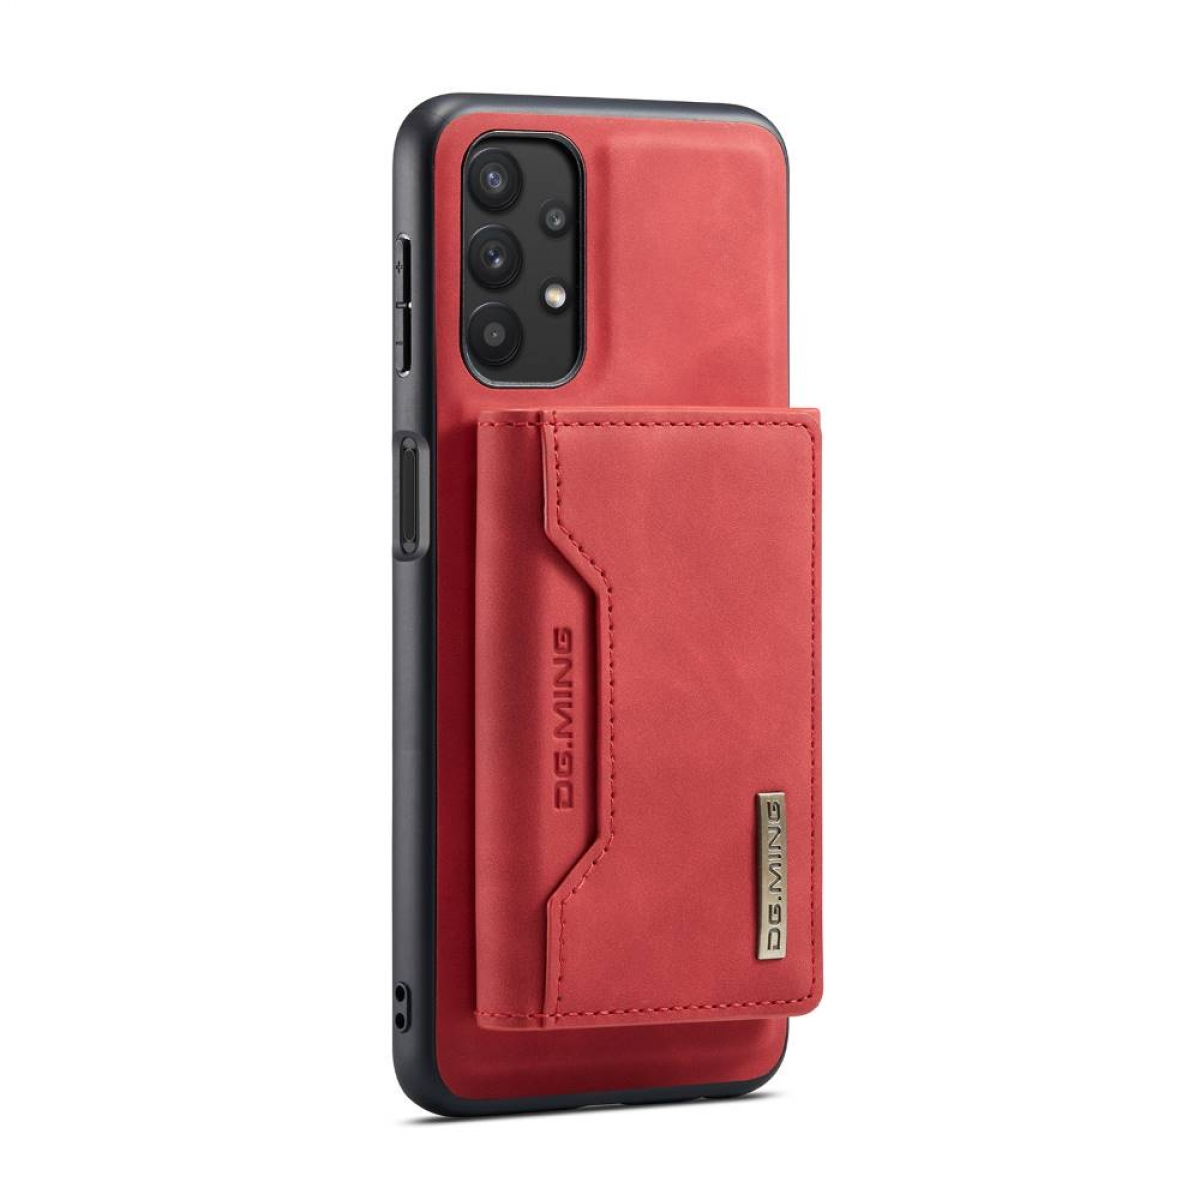 DG MING Backcover, 2in1, 5G, Galaxy M2 A32 Rot Samsung